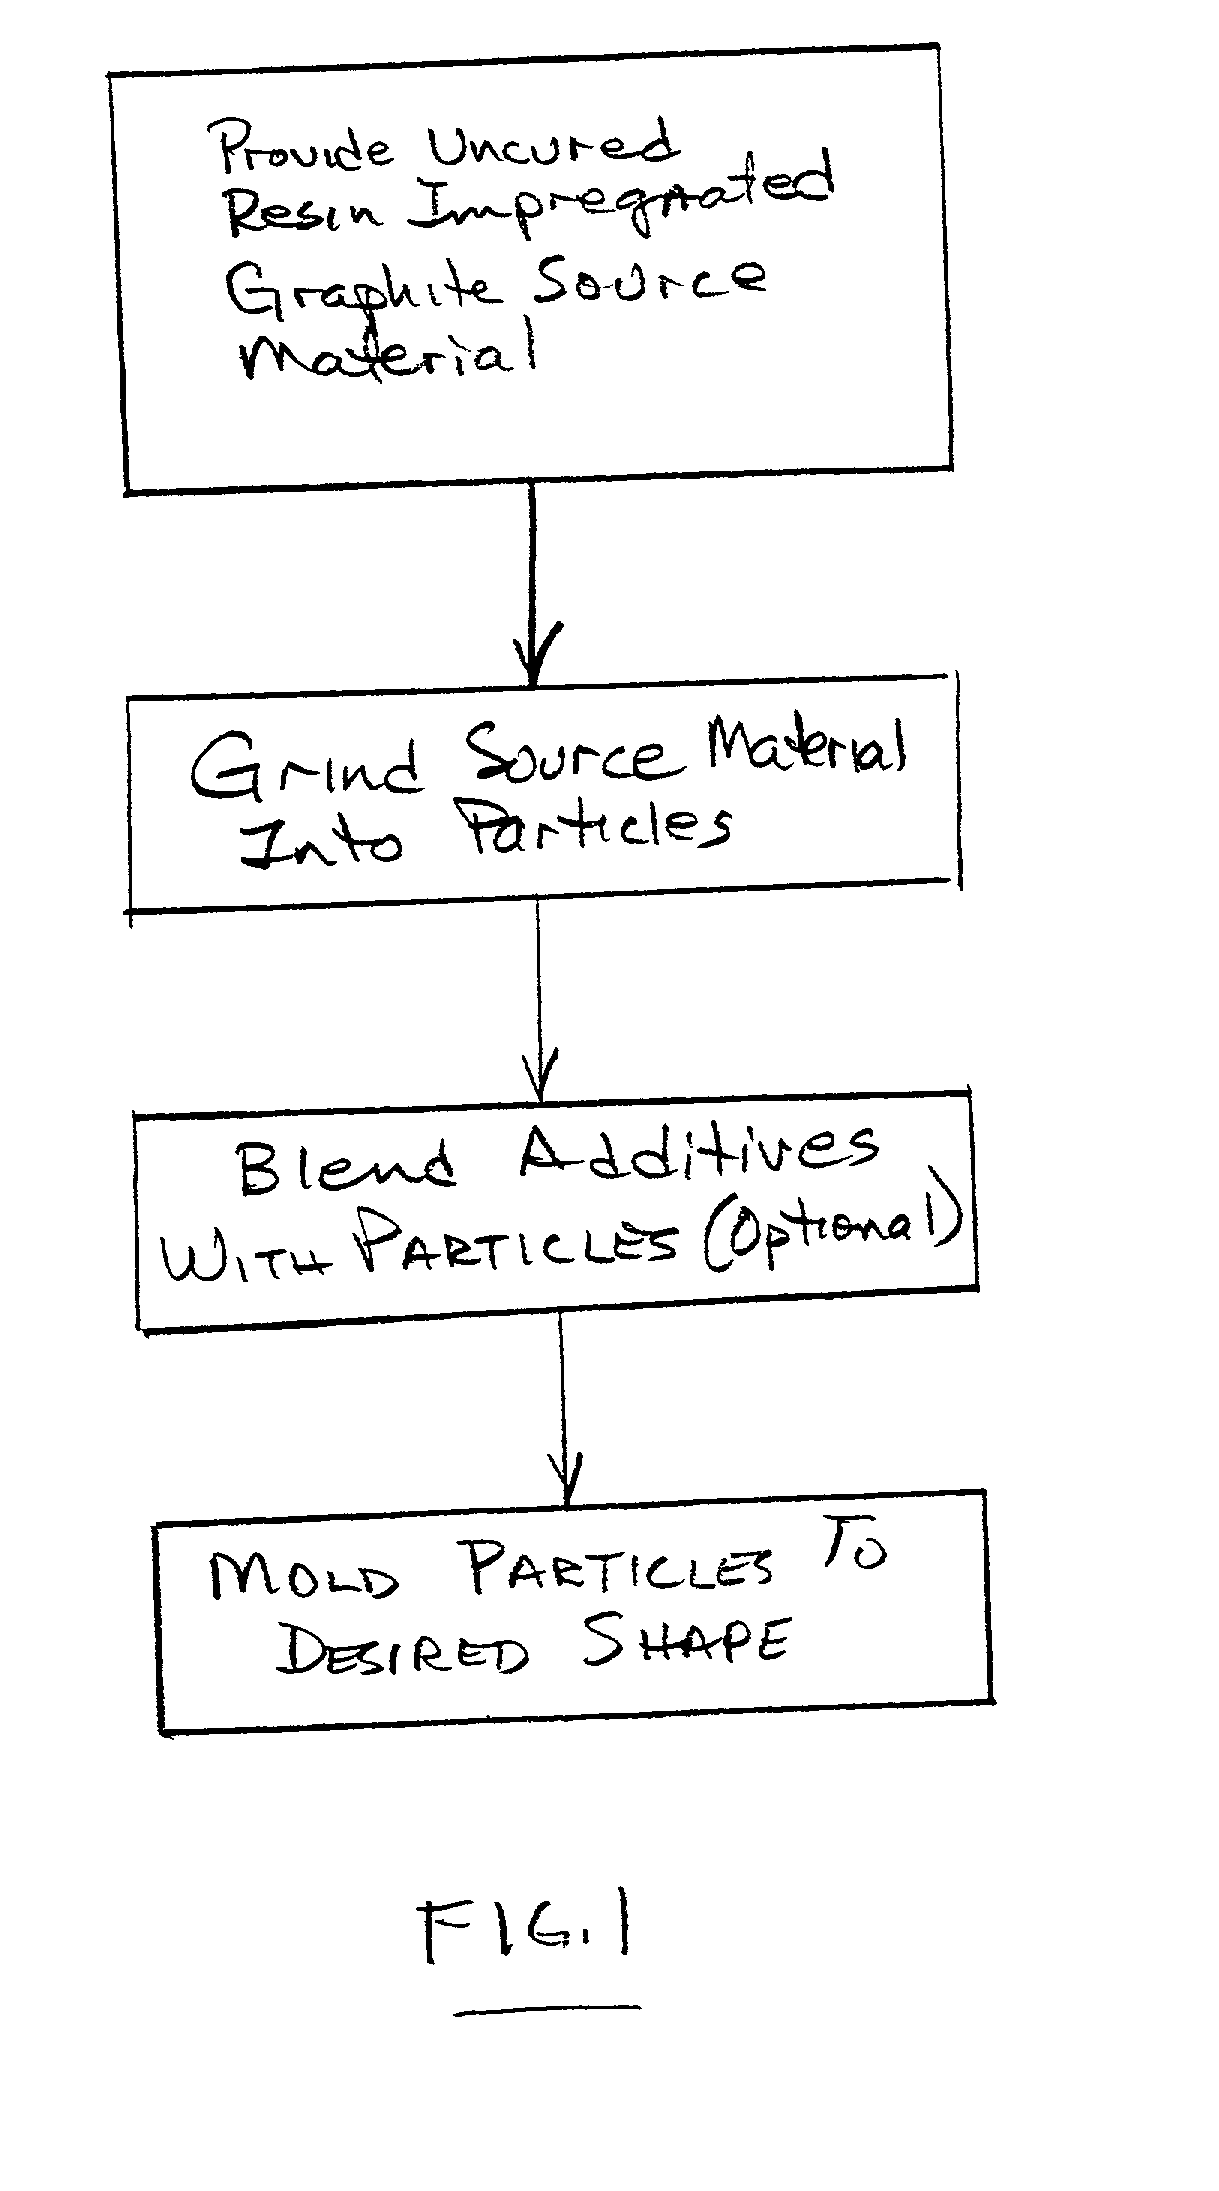 Molding of materials from graphite particles